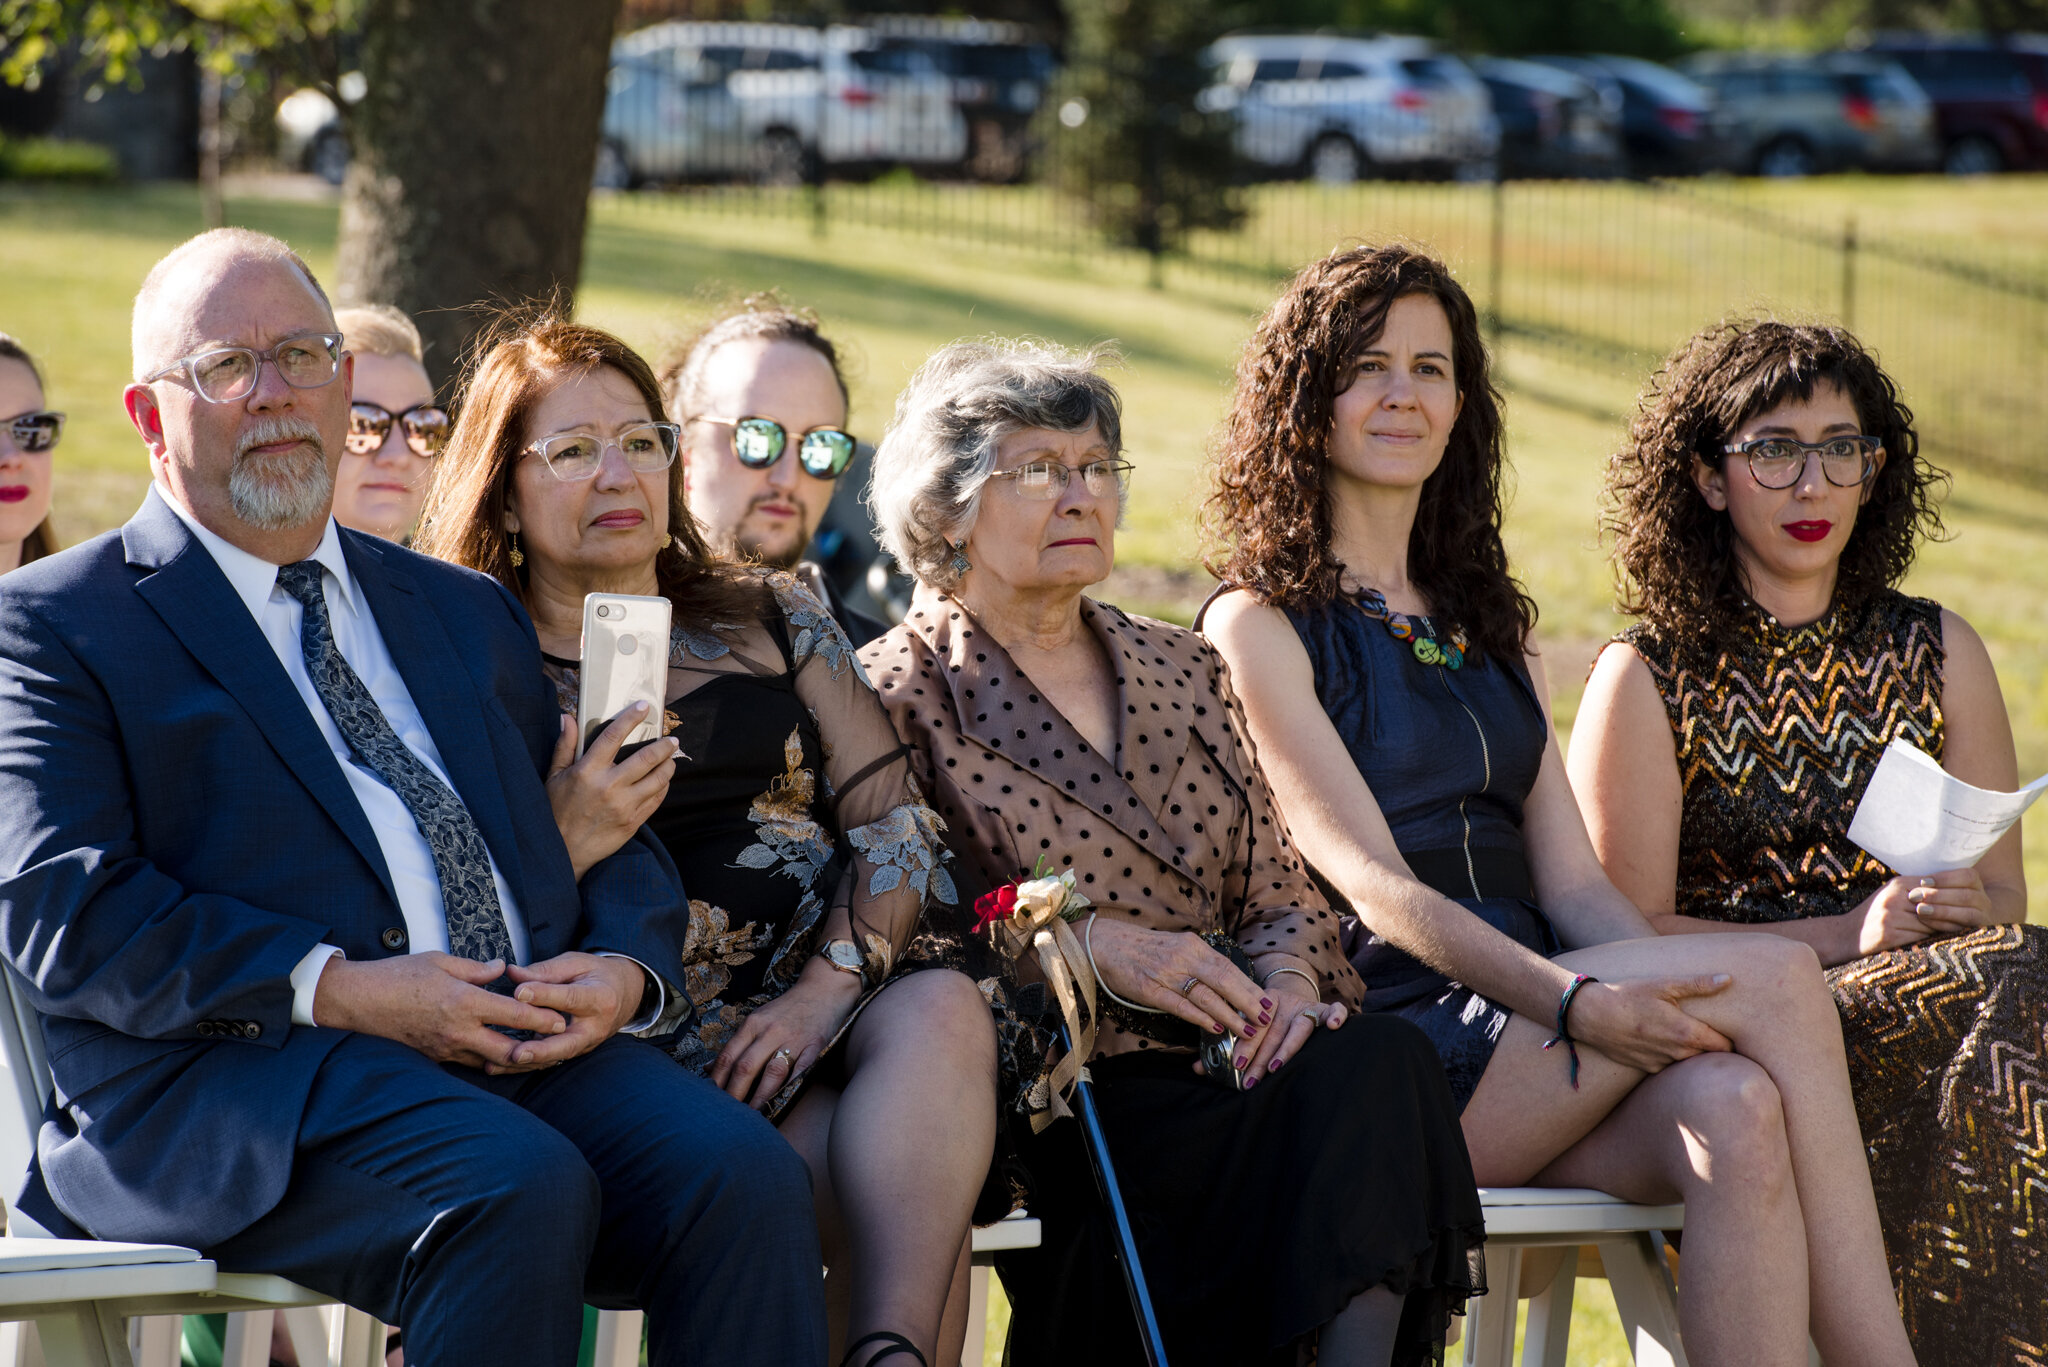 Wedding guests look on from seats during ceremony at Roger Williams Botanical Center Providence Rhode Island Michelle Schapiro New England Event Photographer